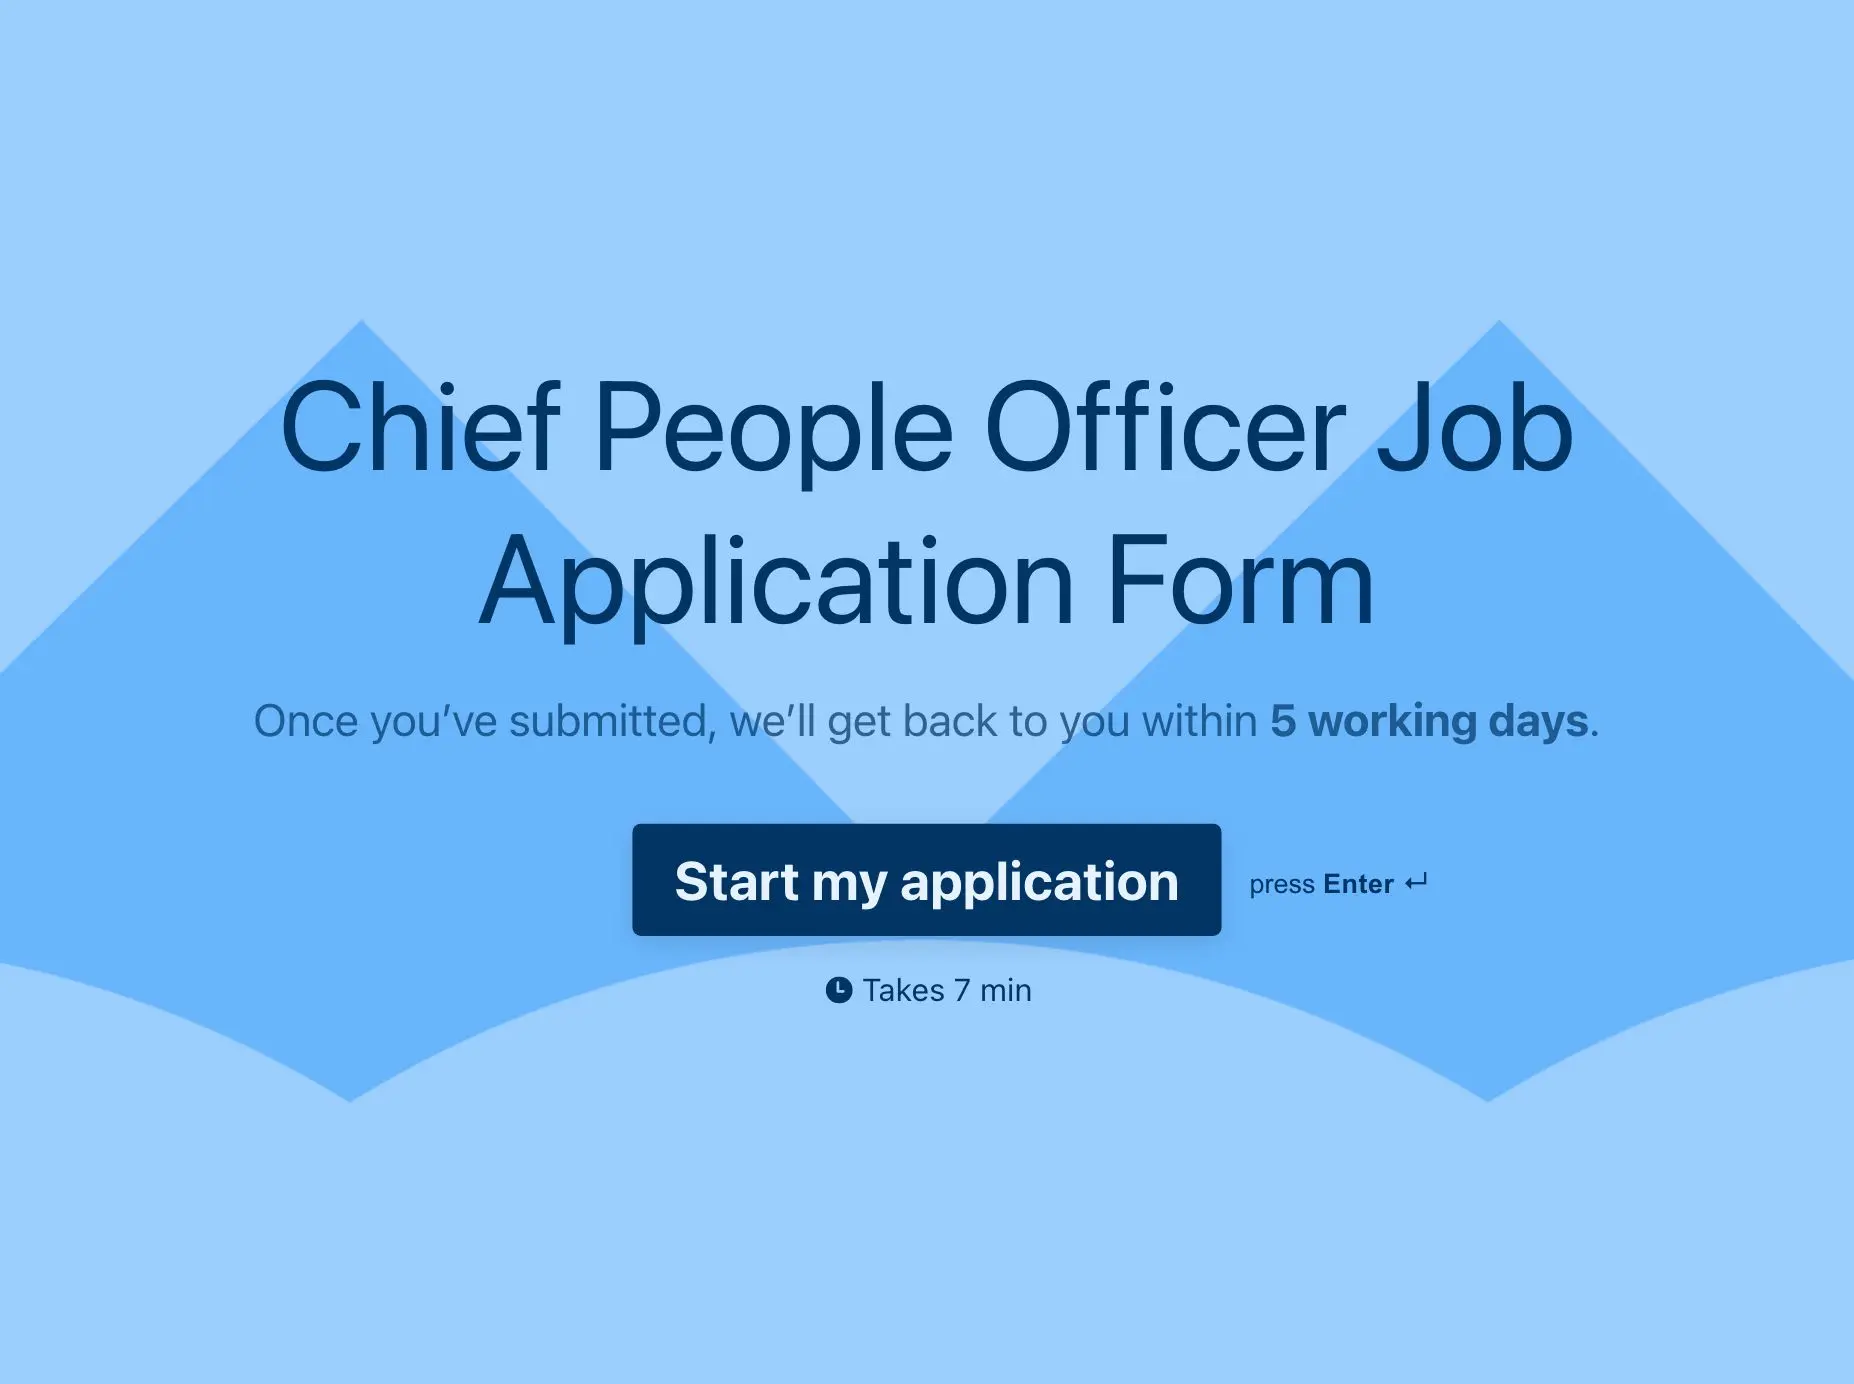 Chief People Officer Job Application Form Template Hero